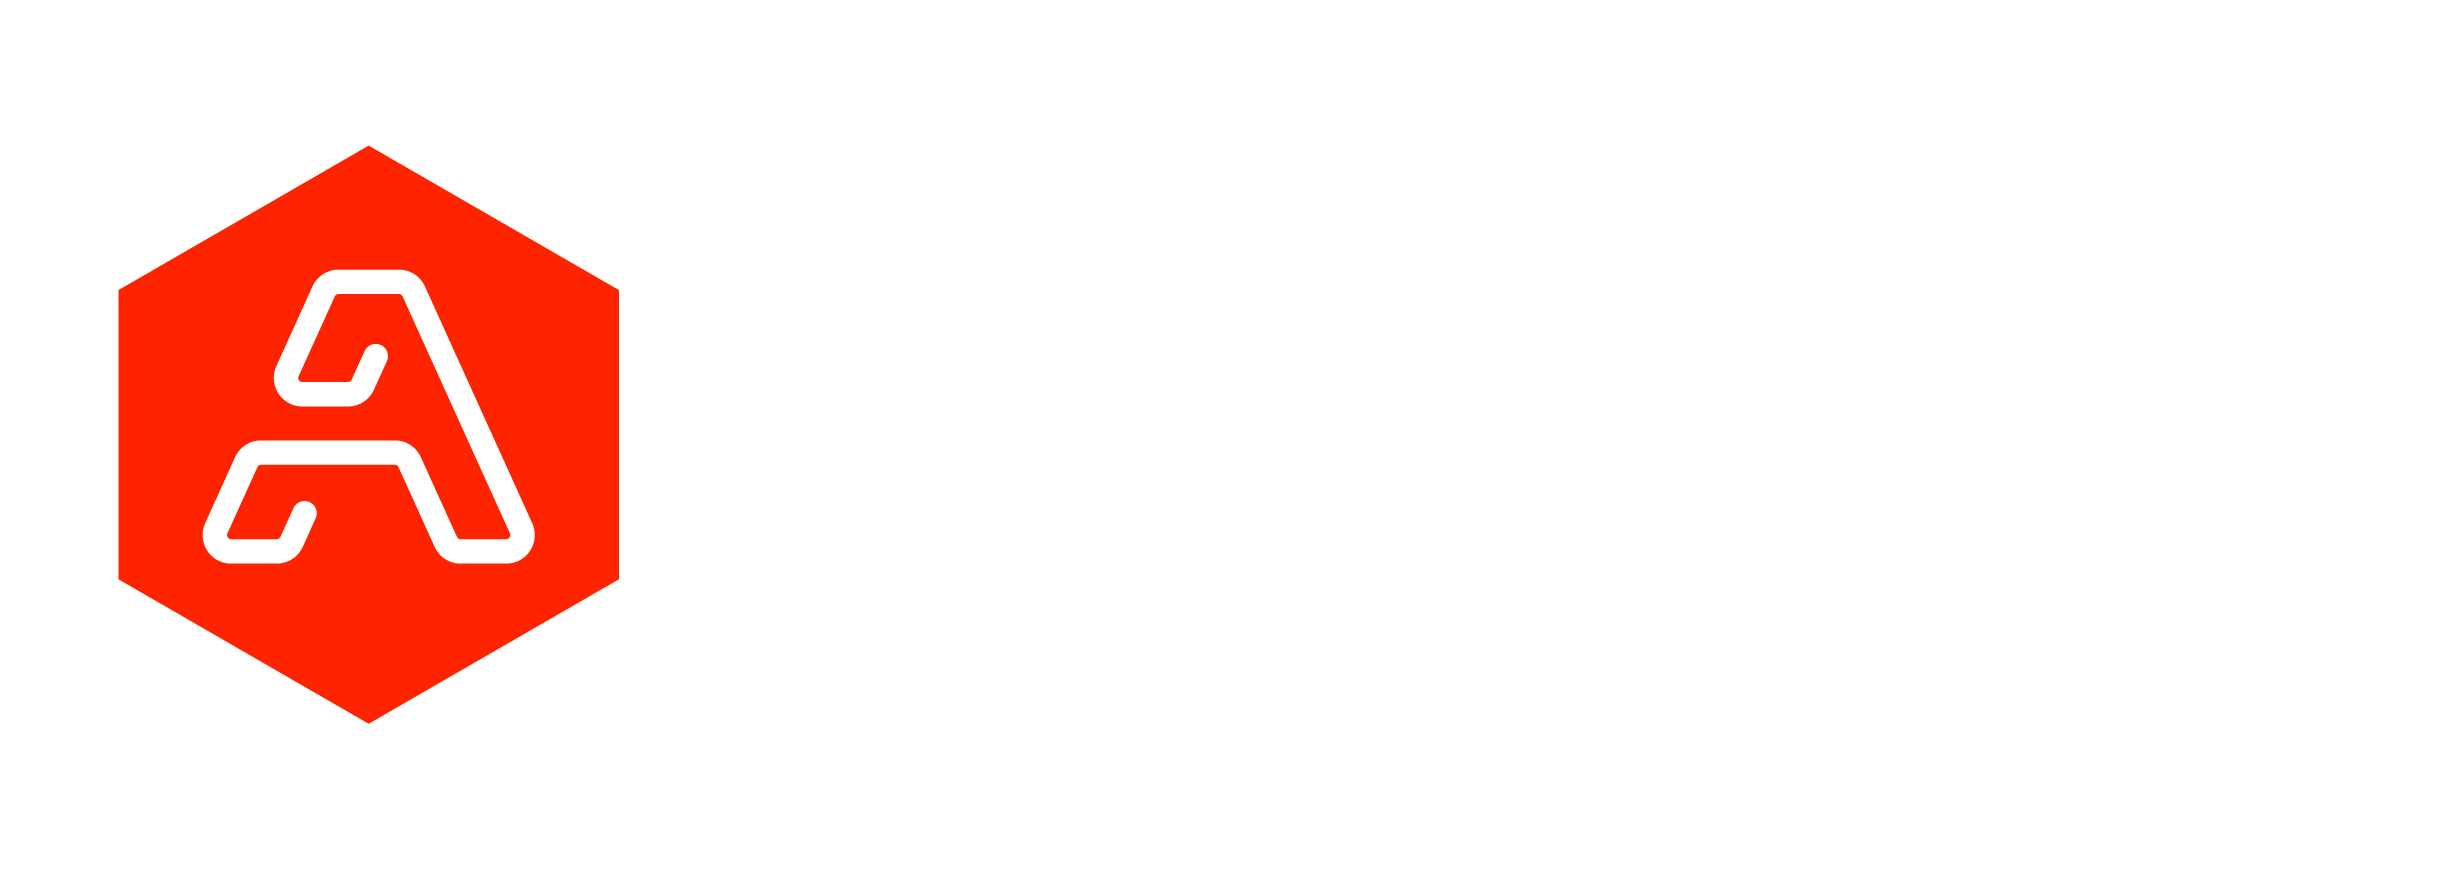 The Perth Artifactory